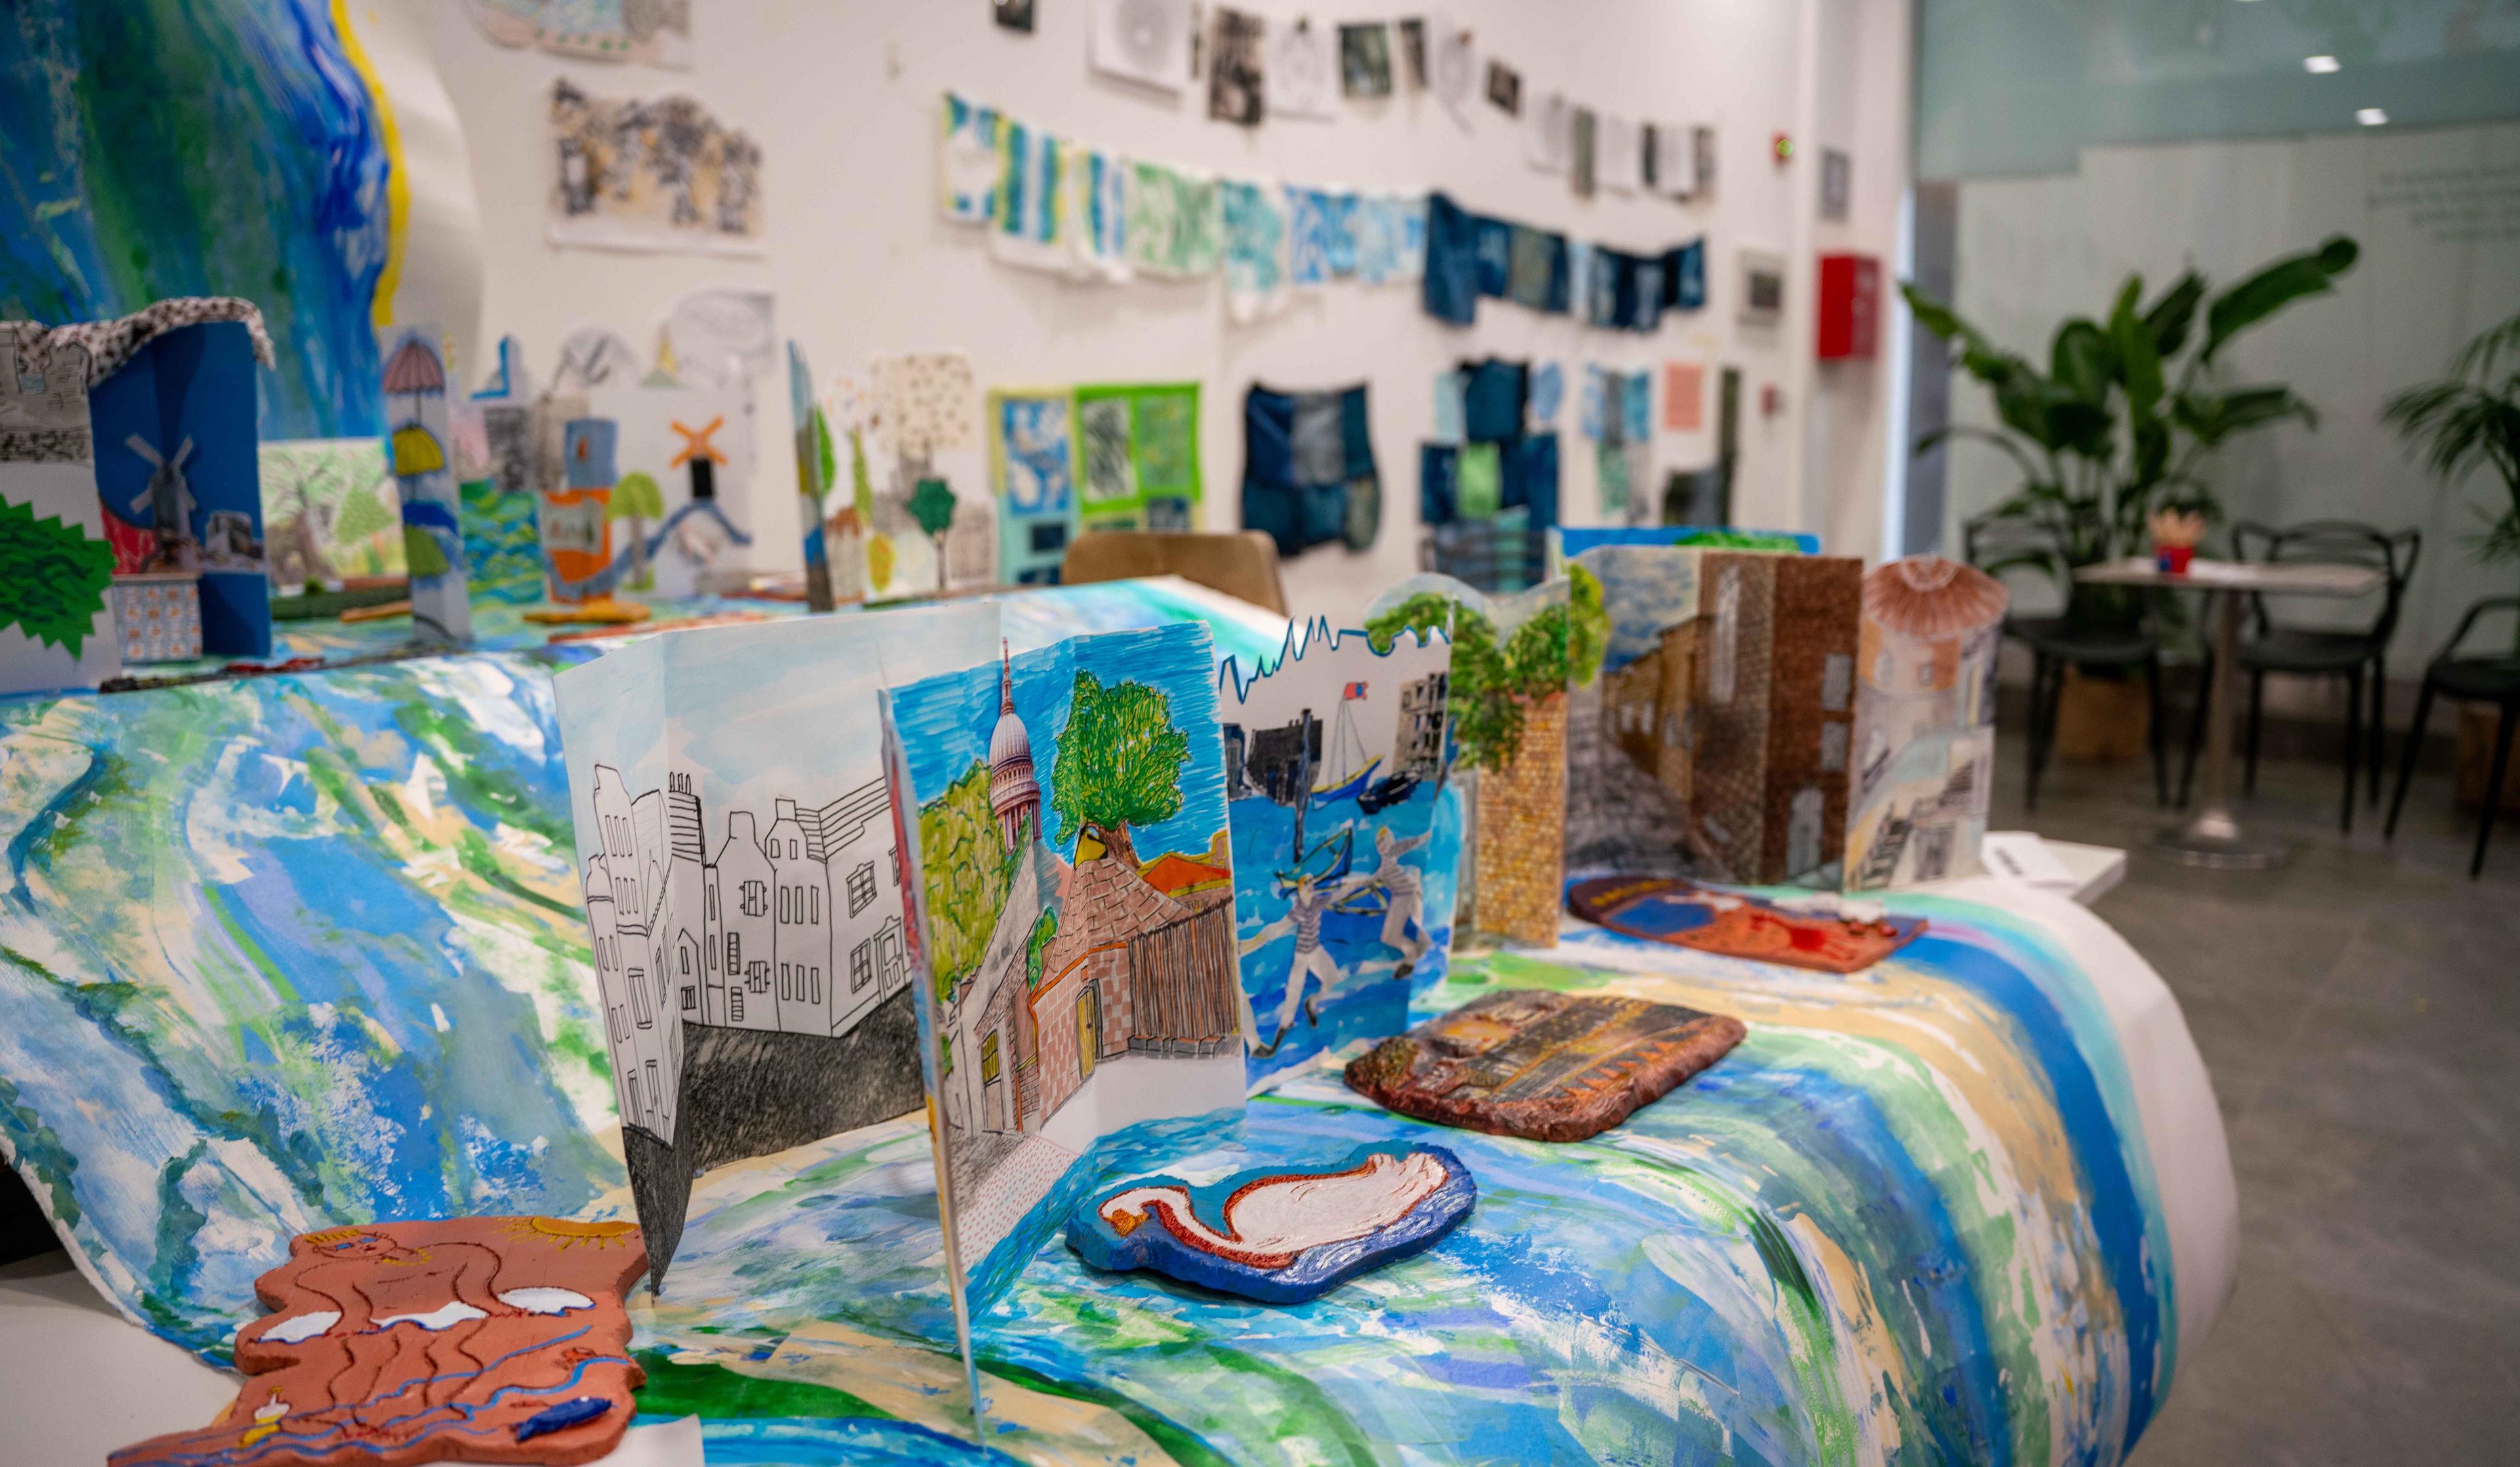 Photograph of the inside of a display of illustration, with a large paper river on display with ceramics and paper sculptures sitting on top of the paper river.